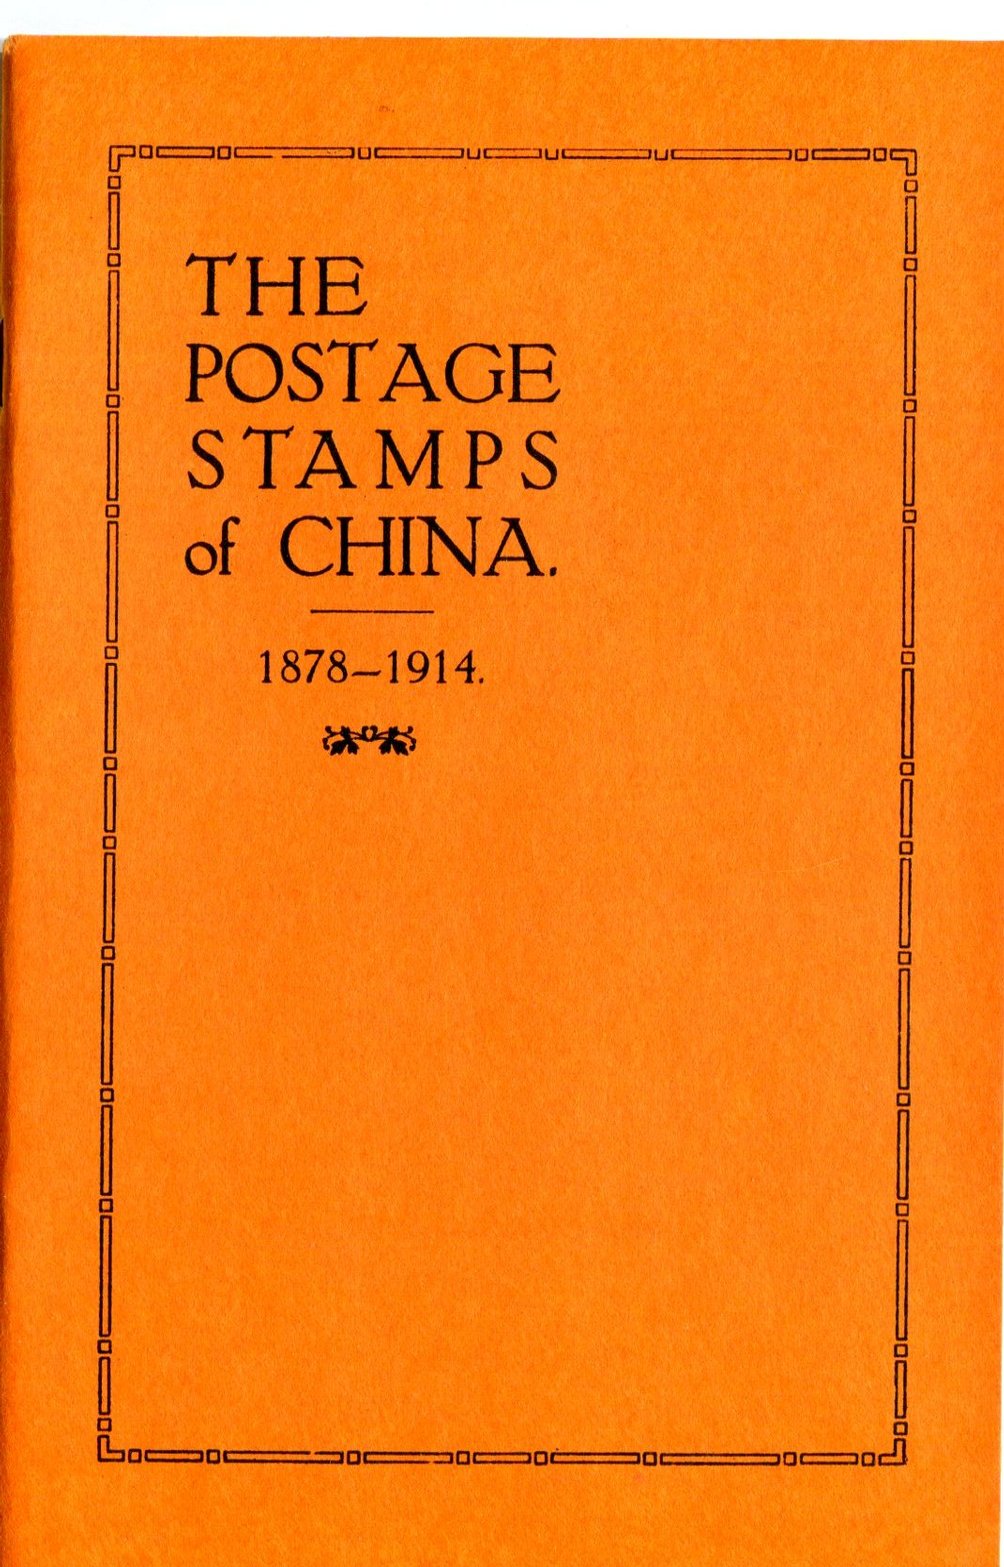 J. Millard Williams reprint, Postage Stamps of China 1878-1914, by "The Collector," 23 pages, 1914, new condition, a good little book on the early issues with insights not found elsewhere (3 oz.)